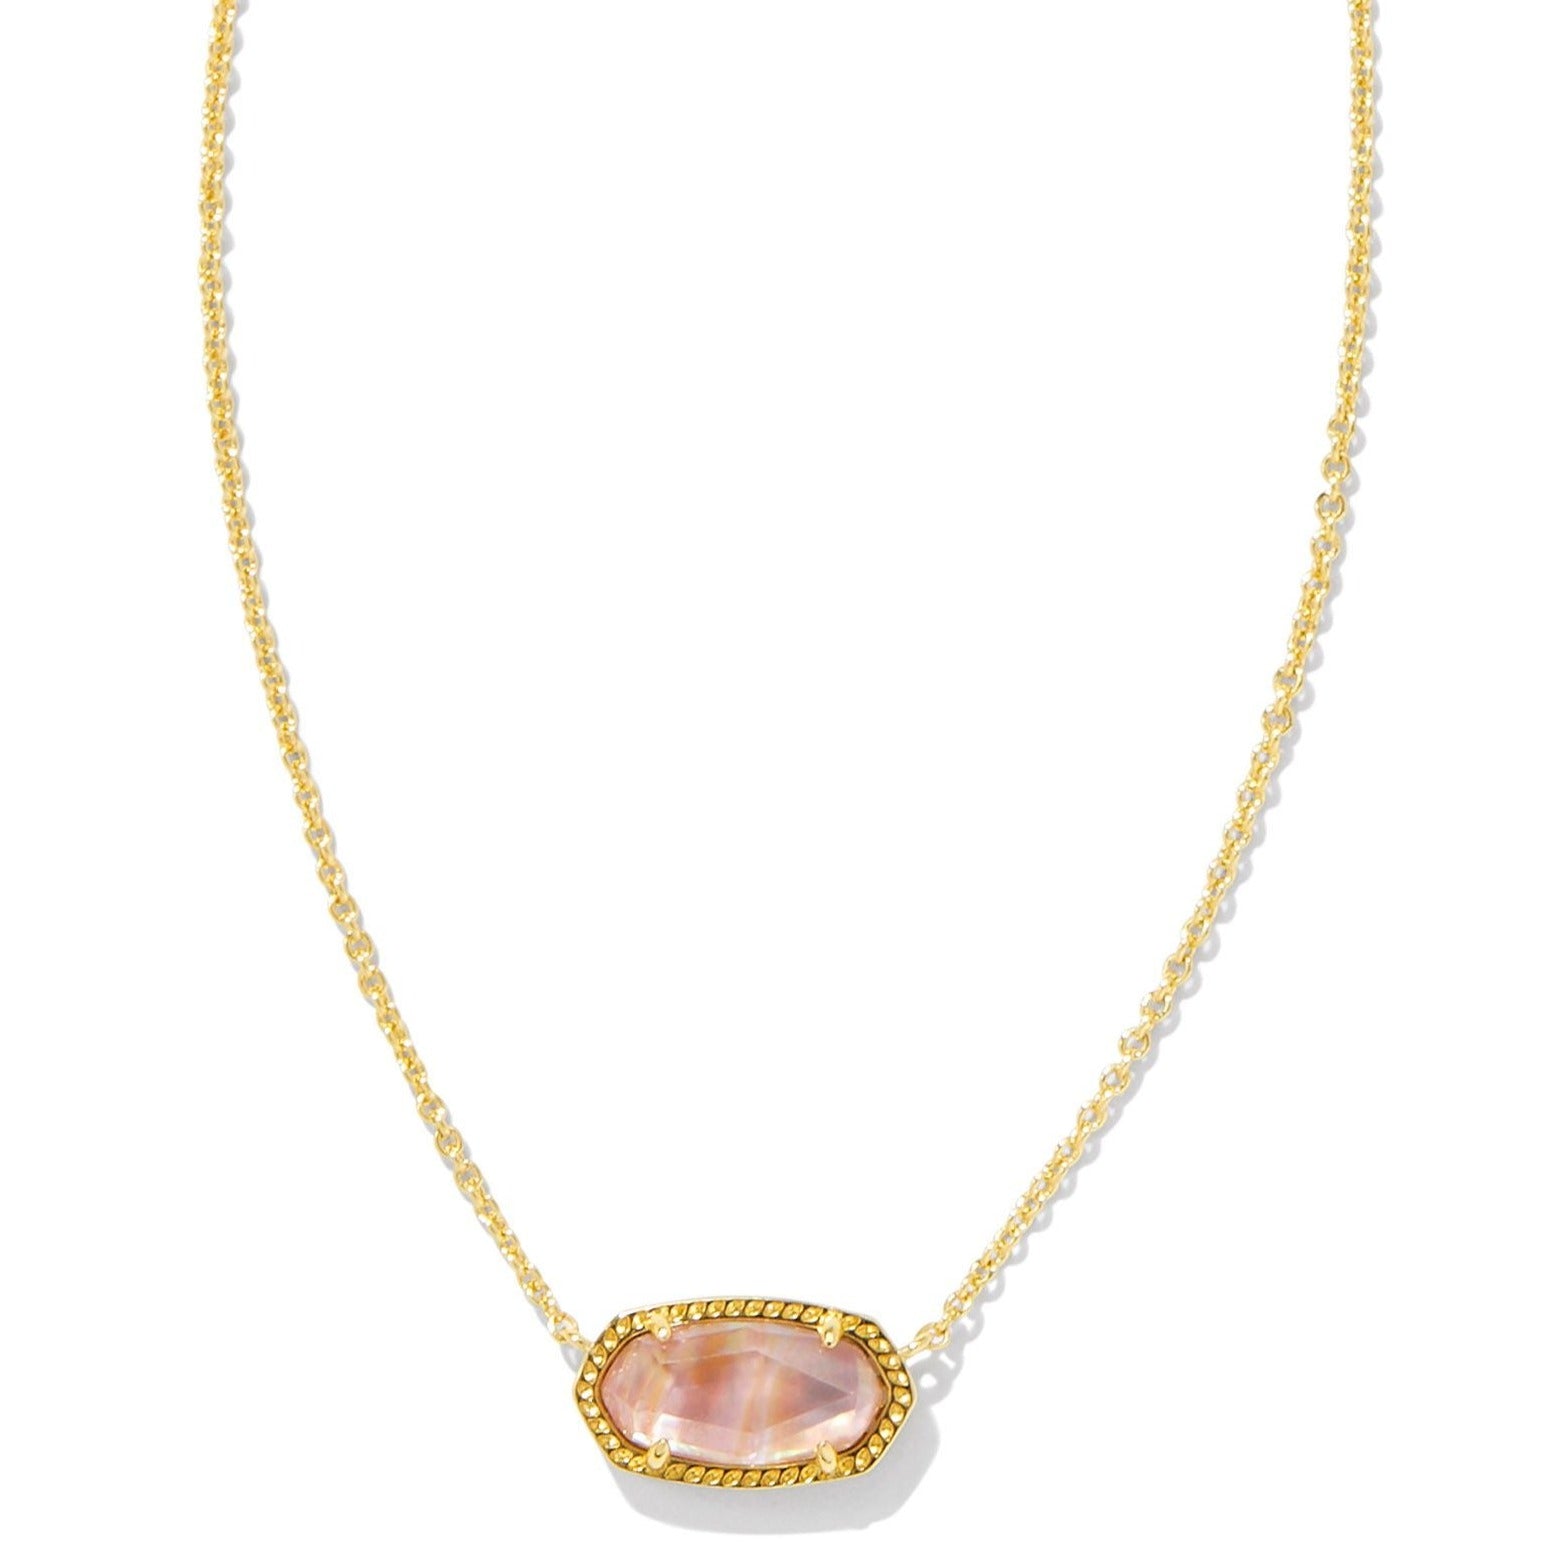 Kendra Scott | Elisa Gold Pendant Necklace in Light Pink Iridescent Abalone - Giddy Up Glamour Boutique